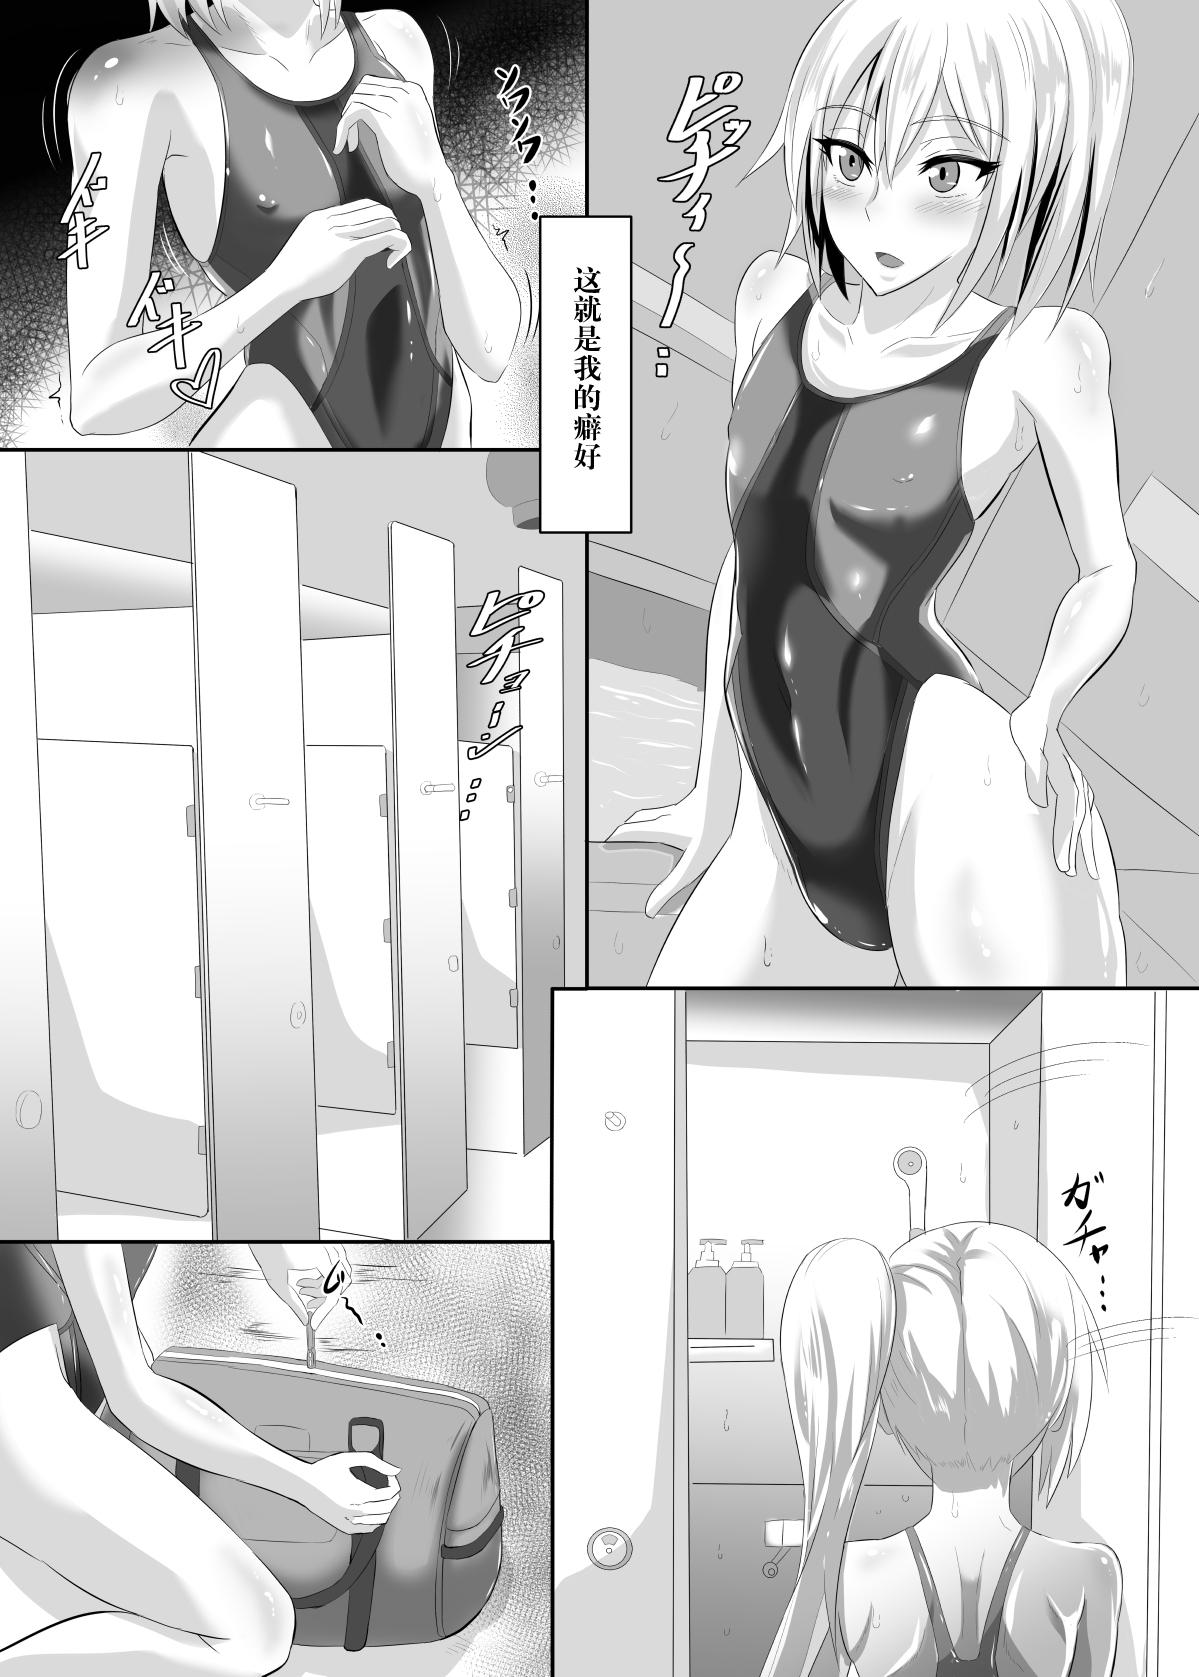 American Gehenna 6 - Fate grand order Guy - Page 11